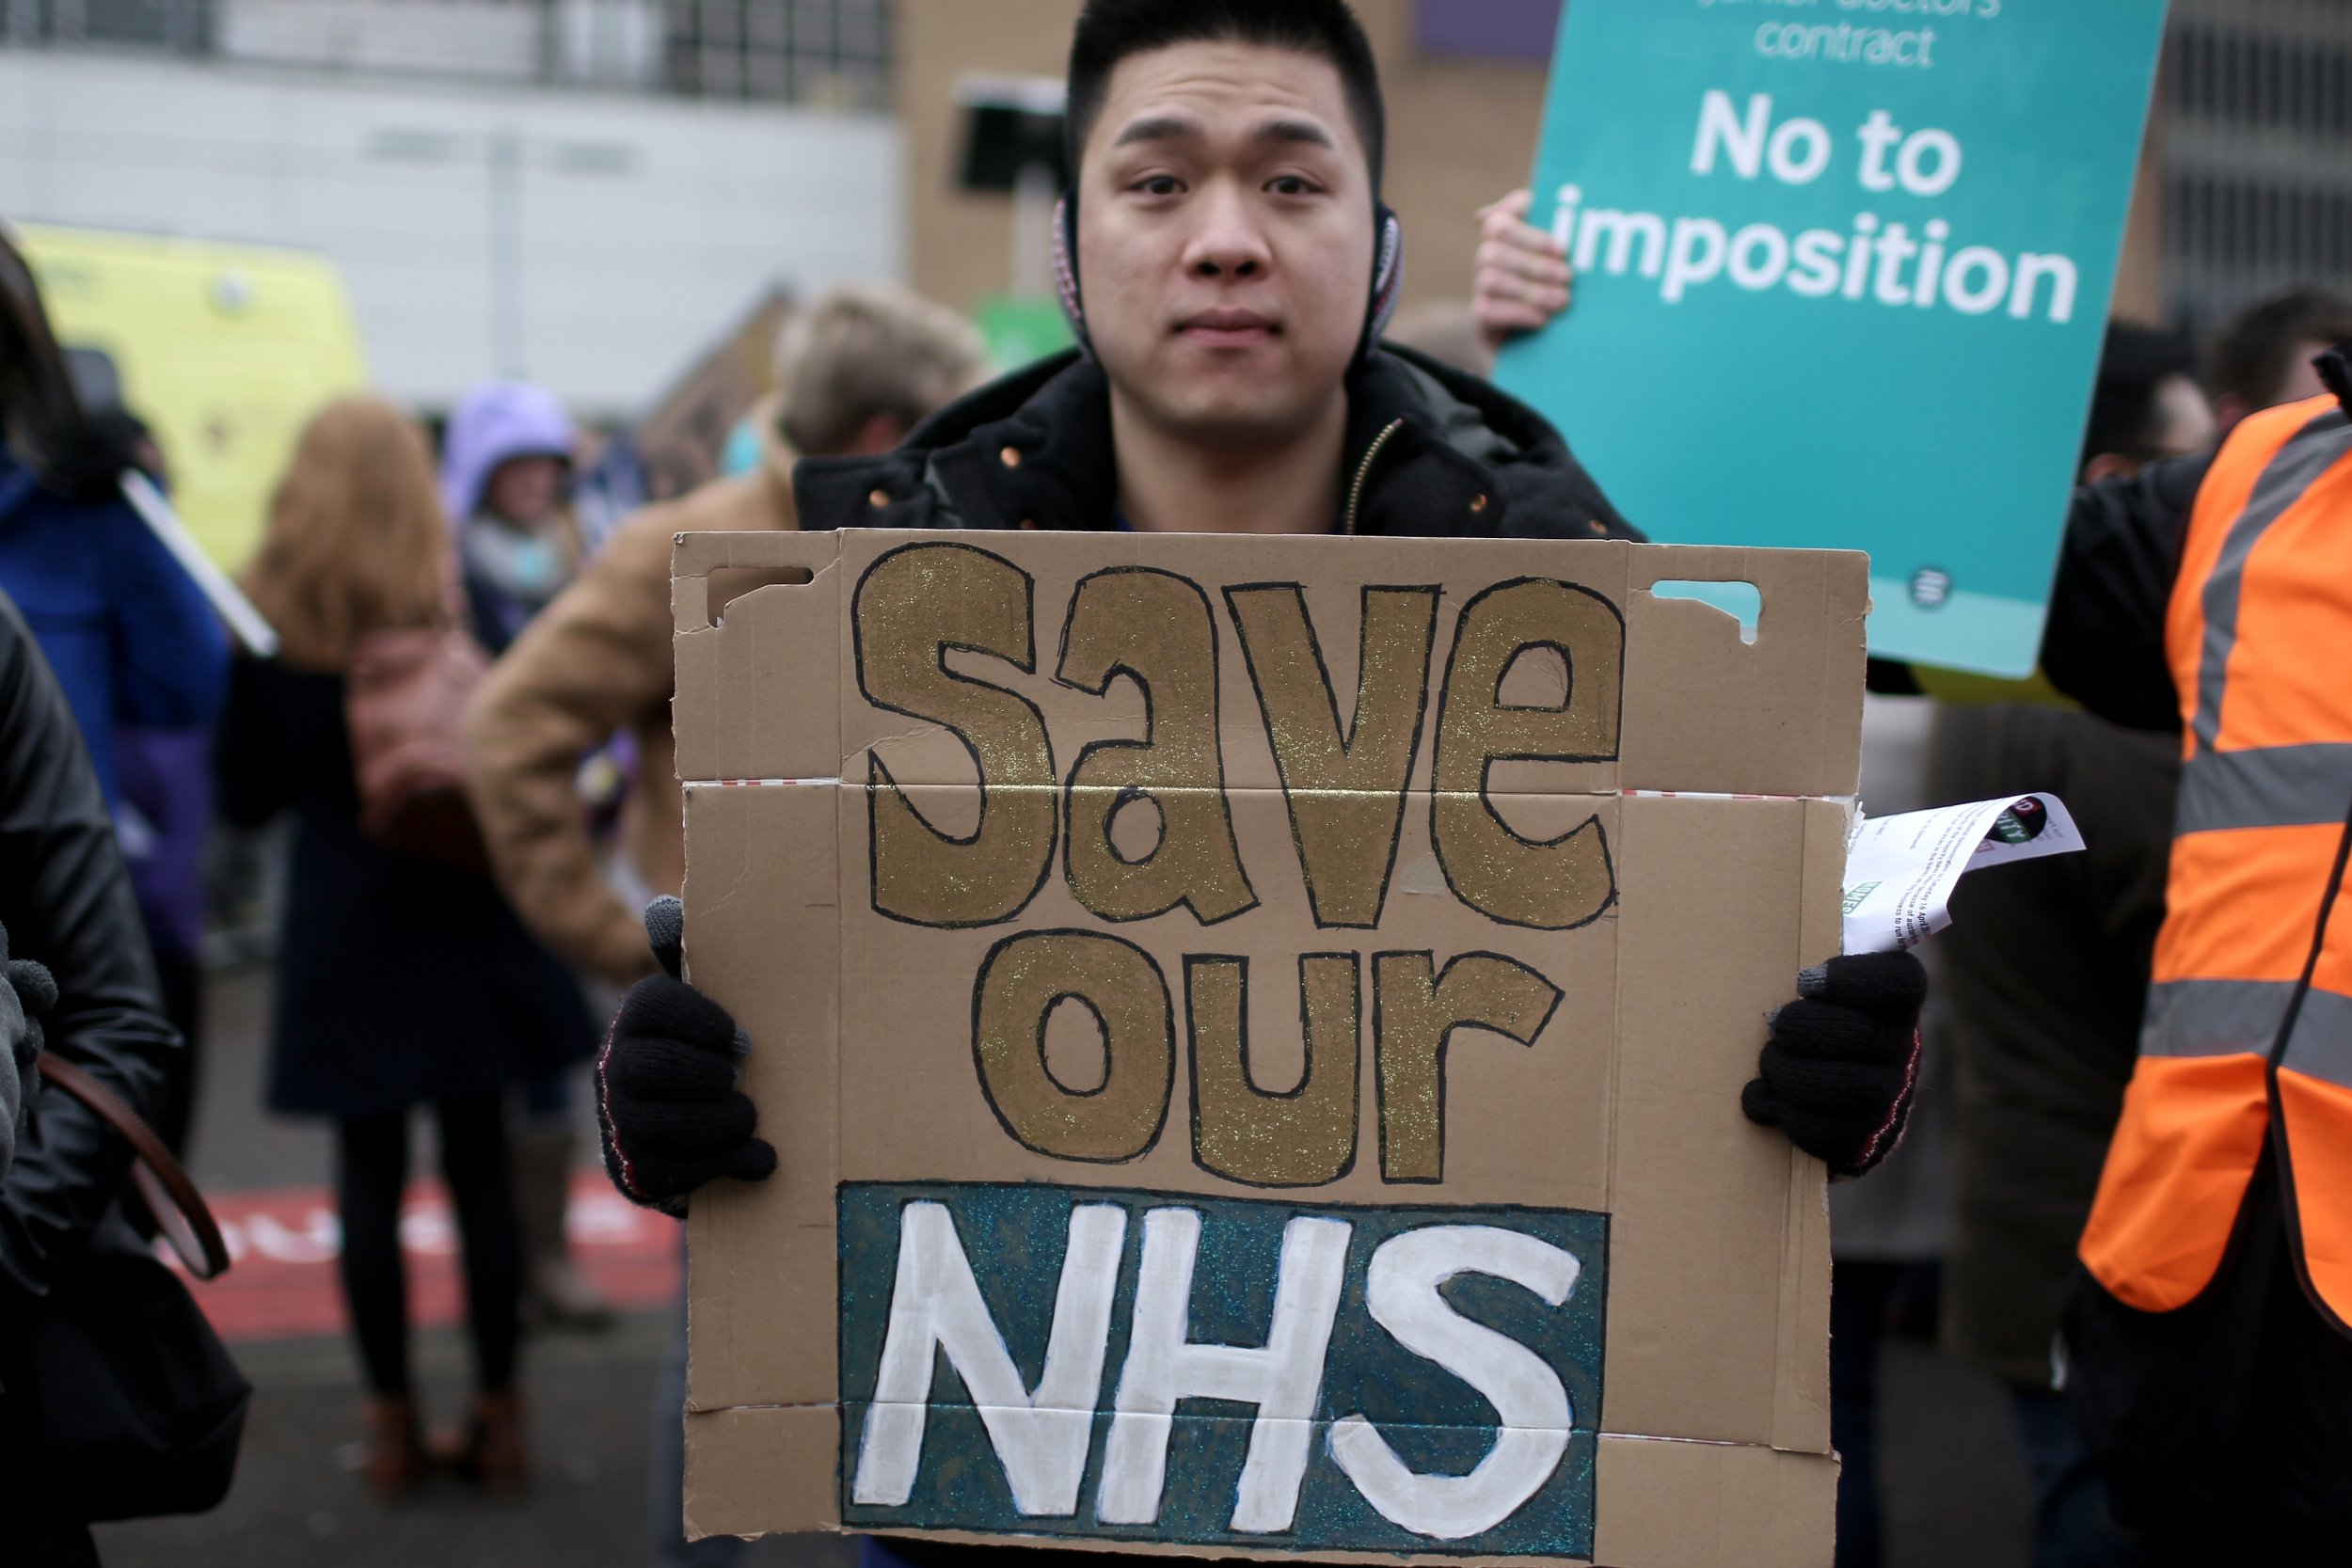 NHS protester